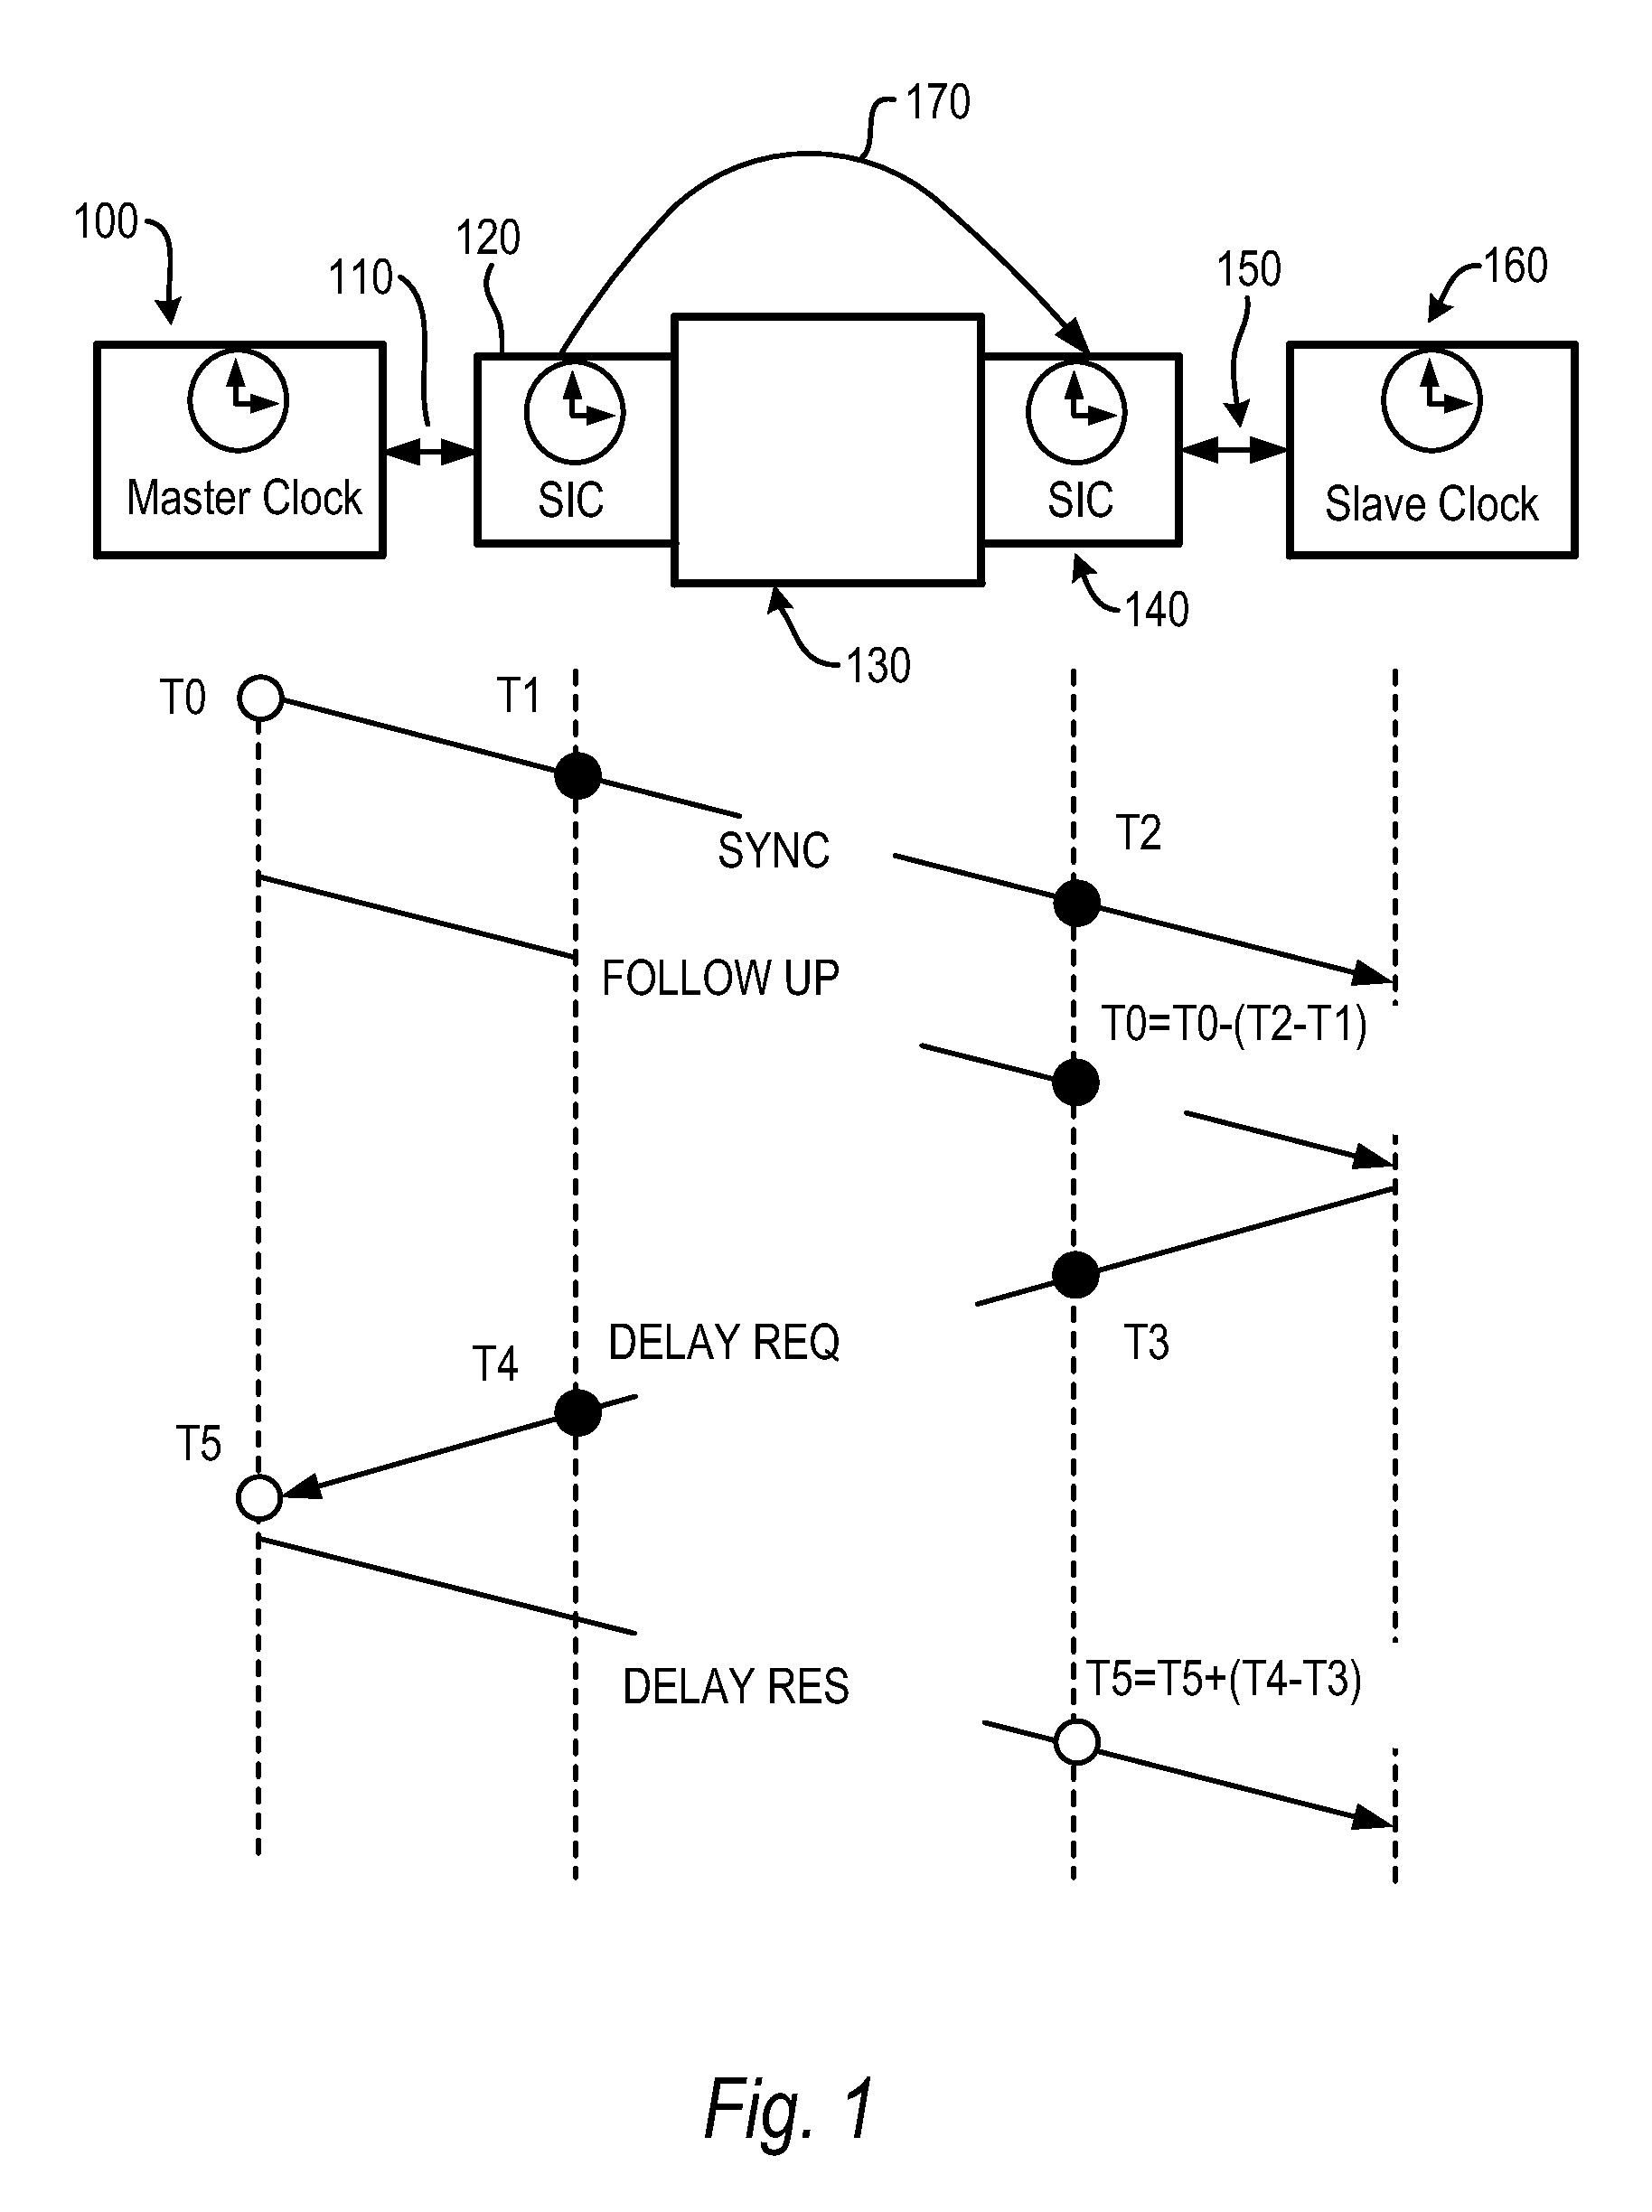 Method and apparatus for establishing IEEE 1588 clock synchronization across a network element comprising first and second cooperating smart interface converters wrapping the network element